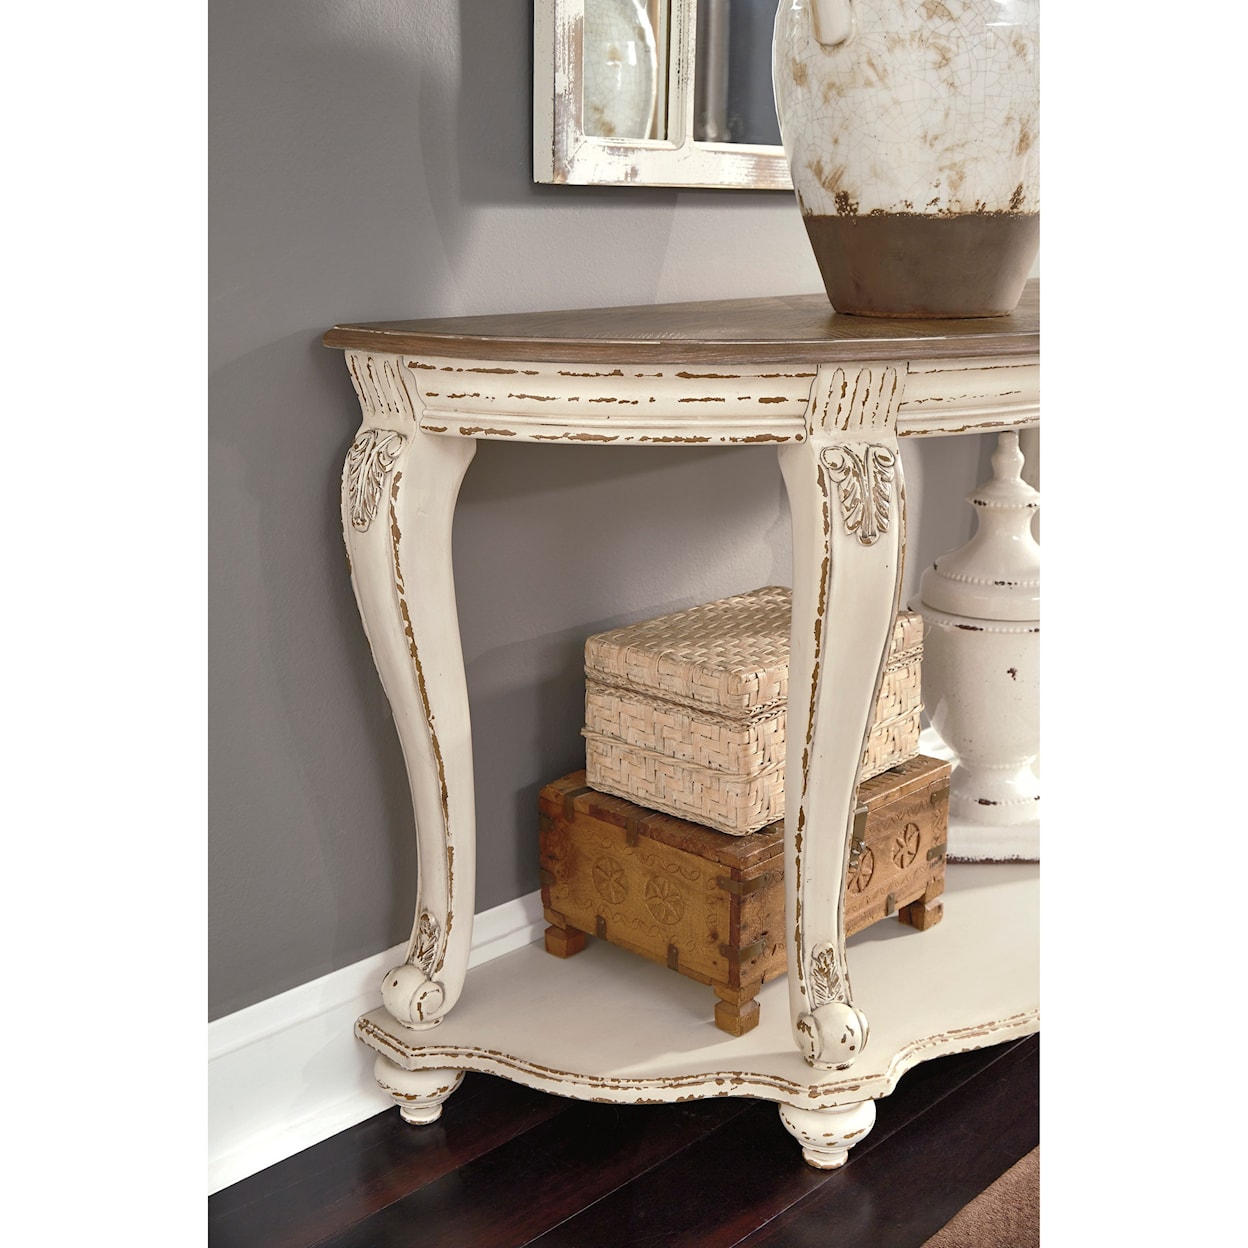 Signature Design by Ashley Realyn Sofa Table